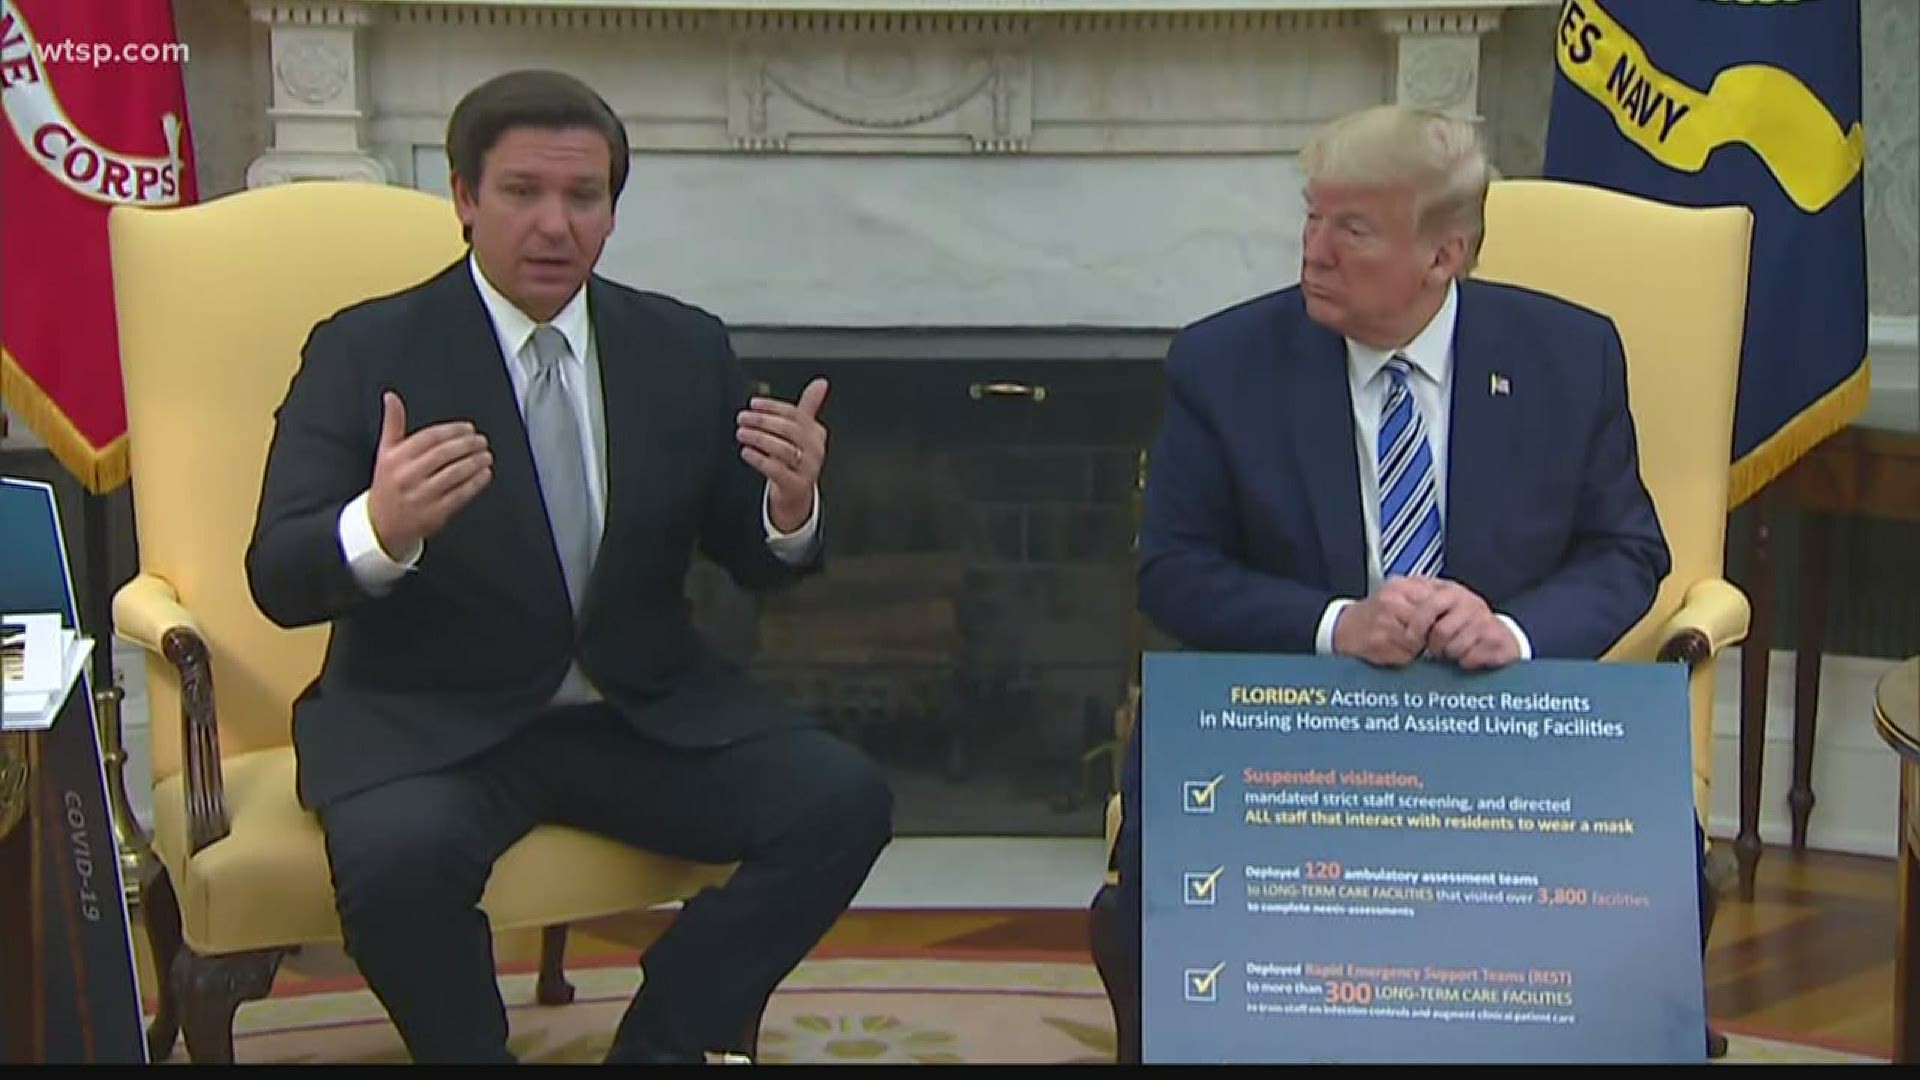 The governor met with President Trump on Tuesday at the White House.